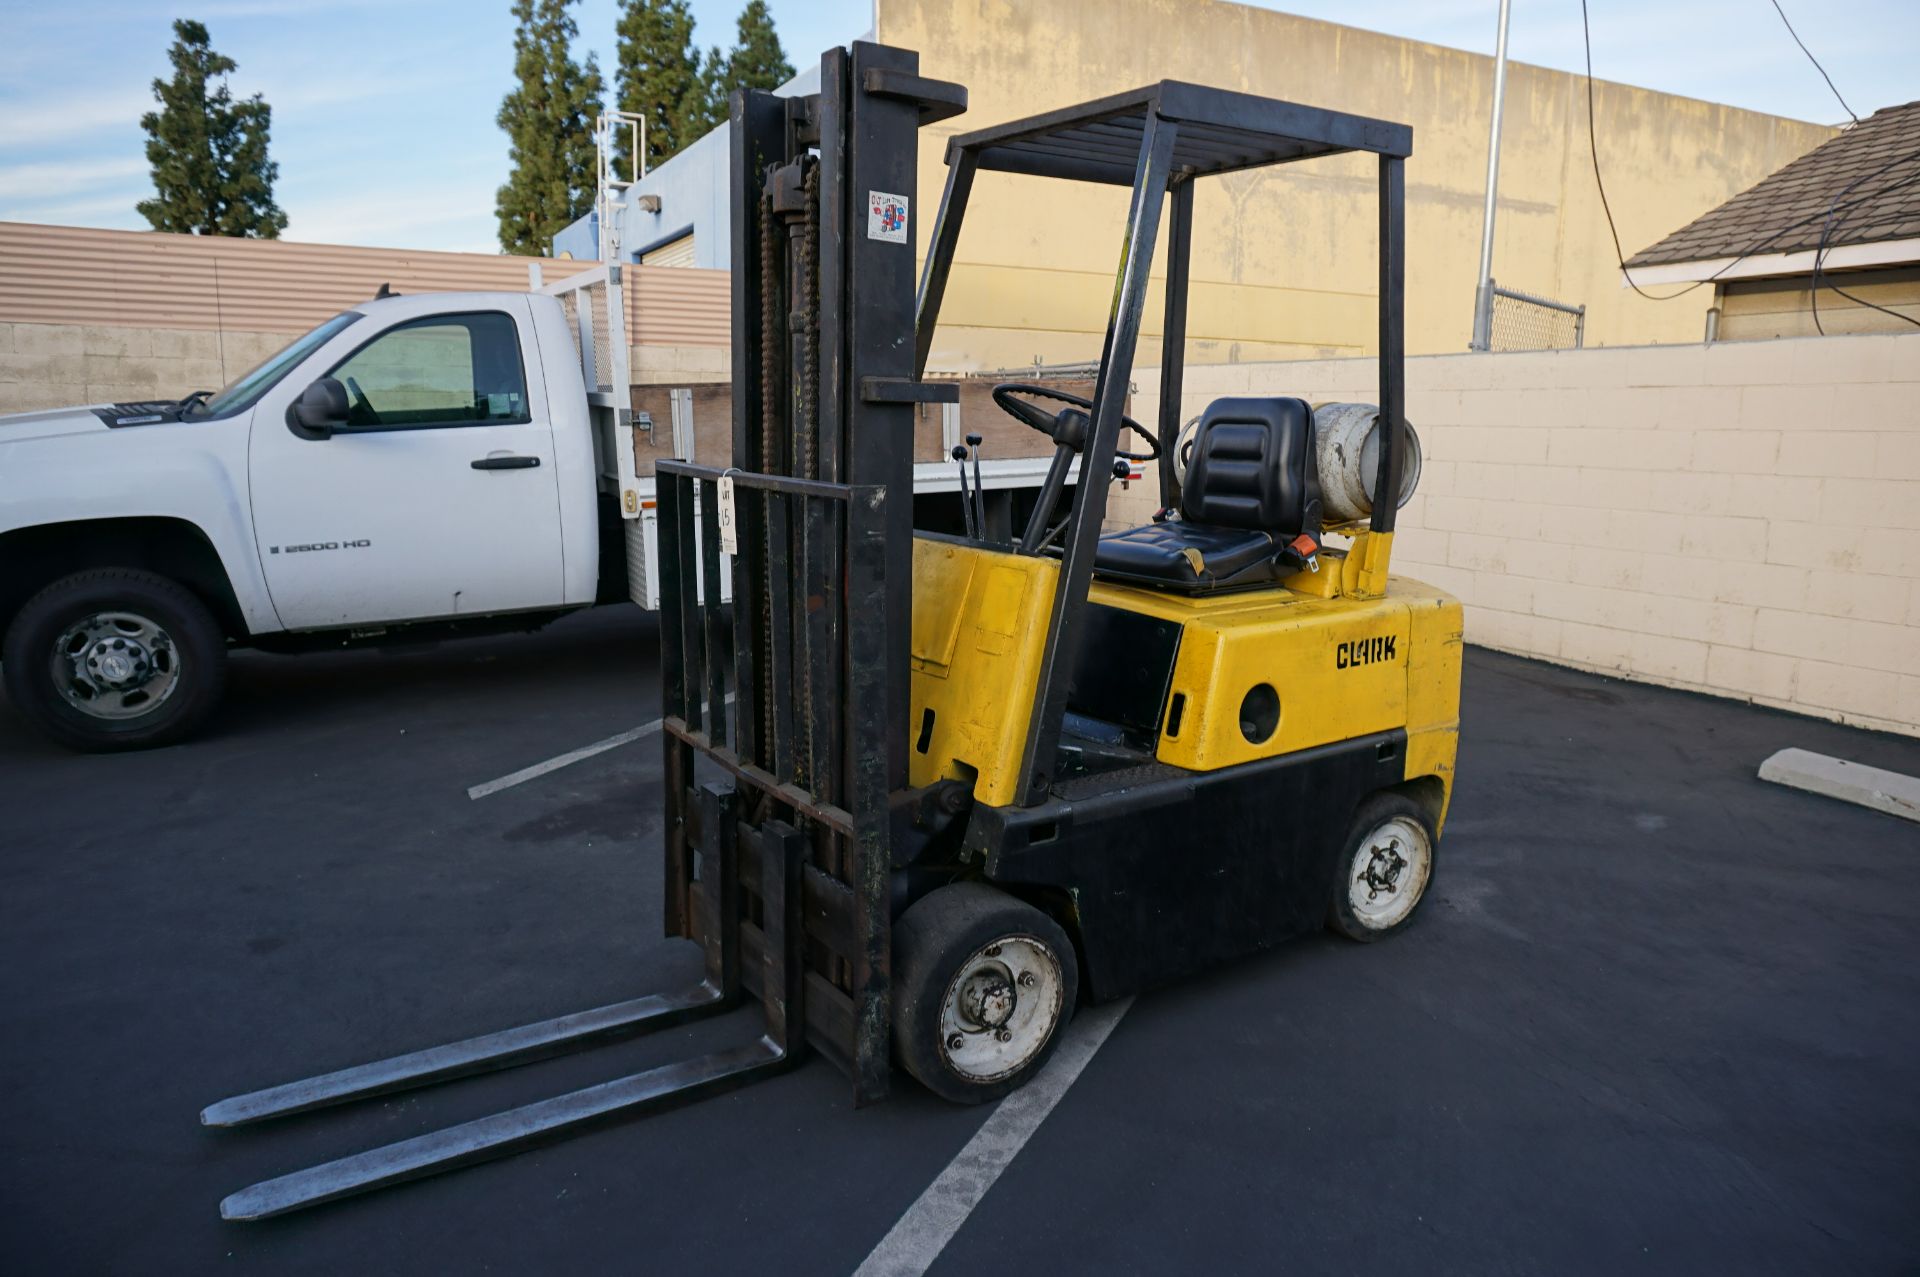 CLARK C50 FORKLIFT 4000 LB CAP, S/N 355-1488-3611, WITH ORIGINAL MANUALS AND CATALOGS - Image 2 of 7